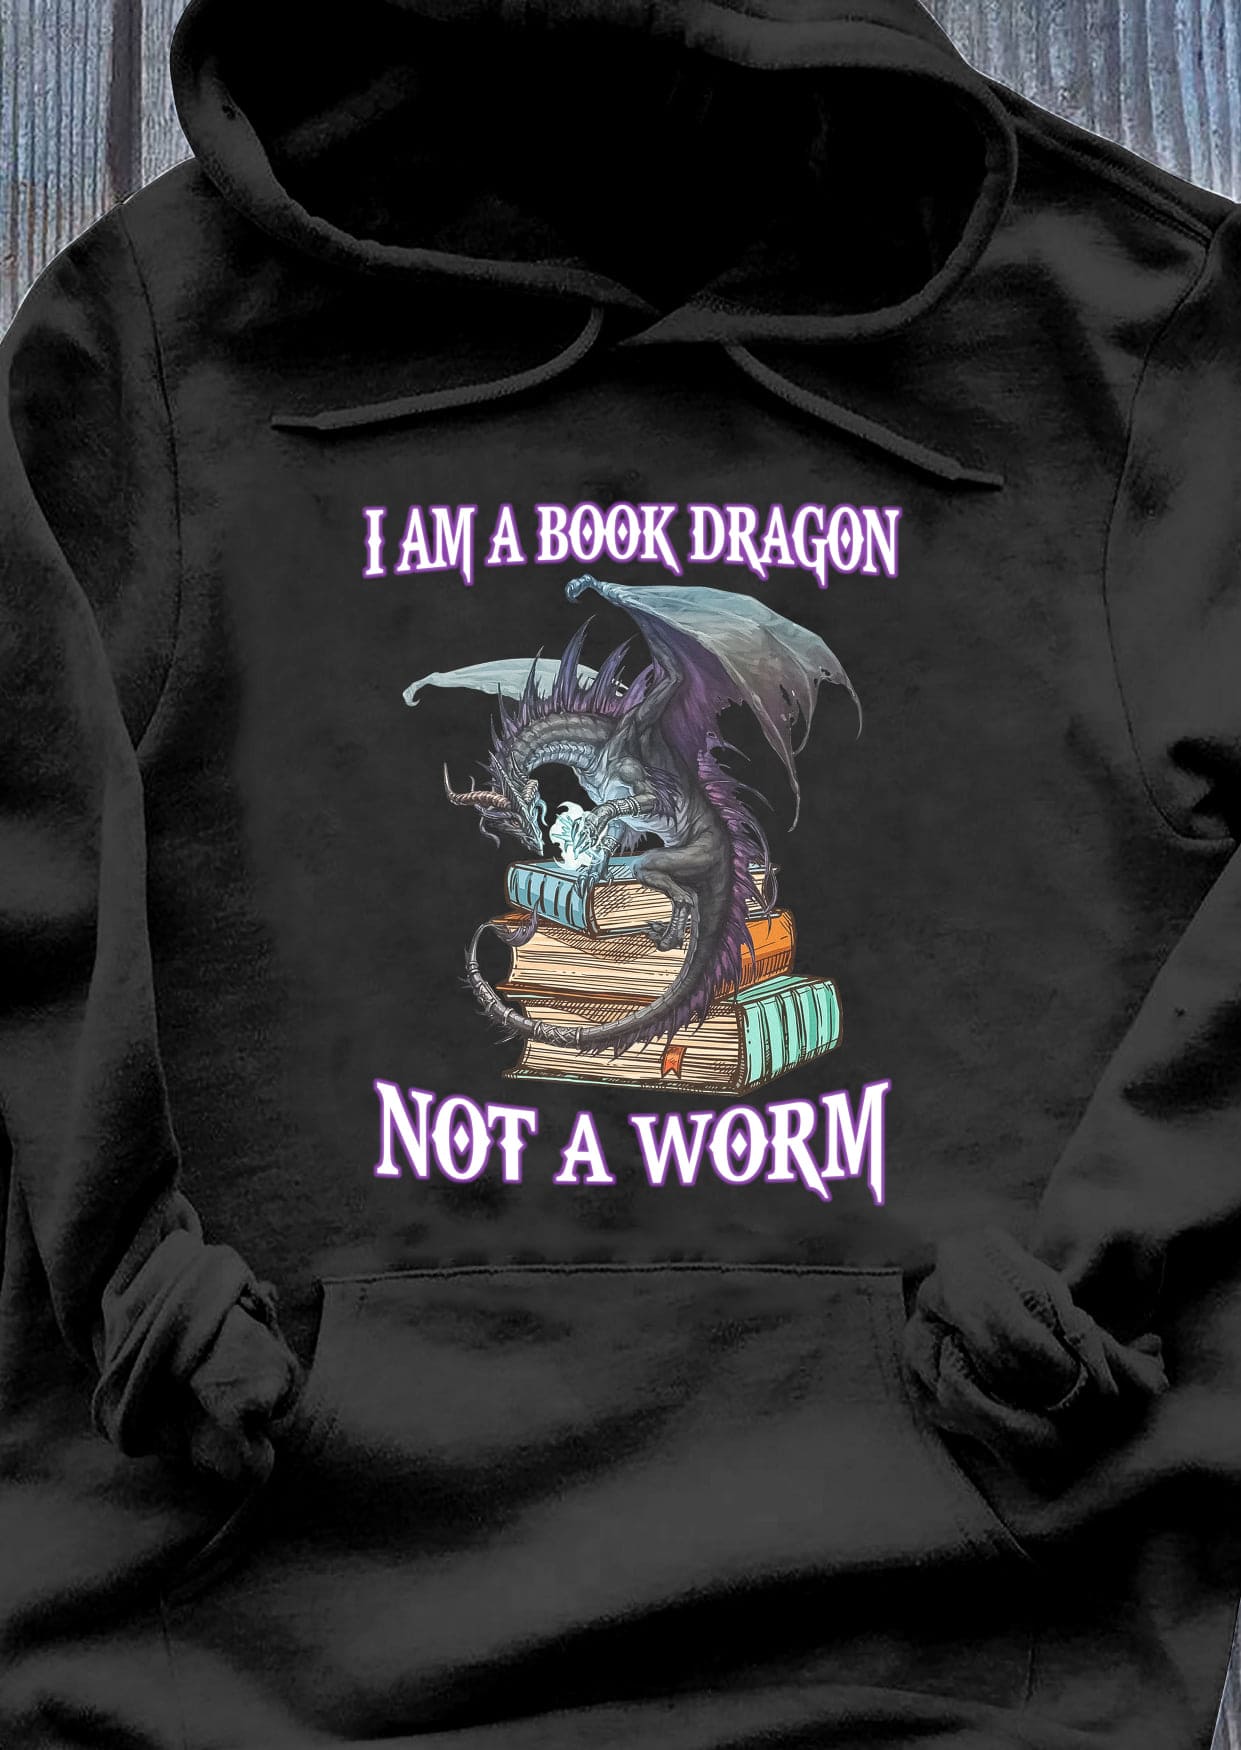 I am a book dragon not a worm - Dragon reading book, gift for book reader